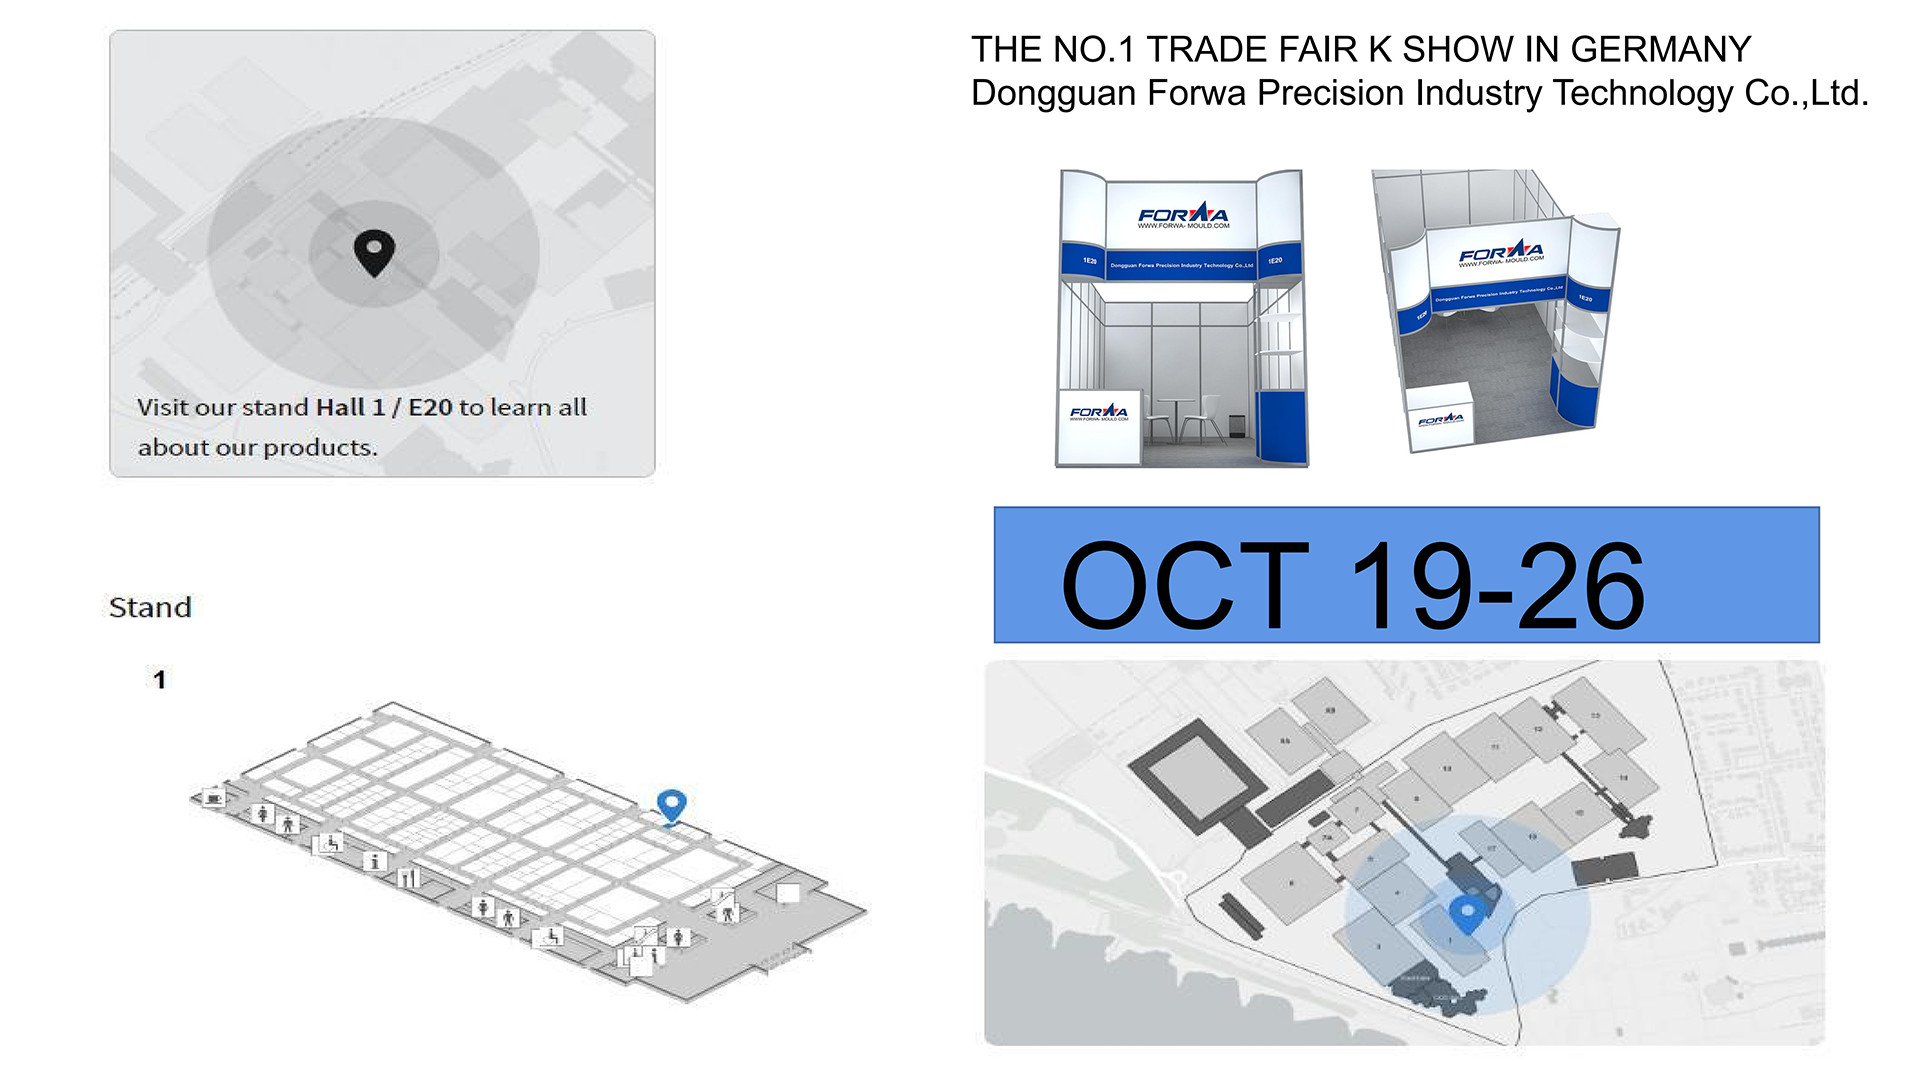 THE NO.1 TRADE FAIR K SHOW IN GERMANY